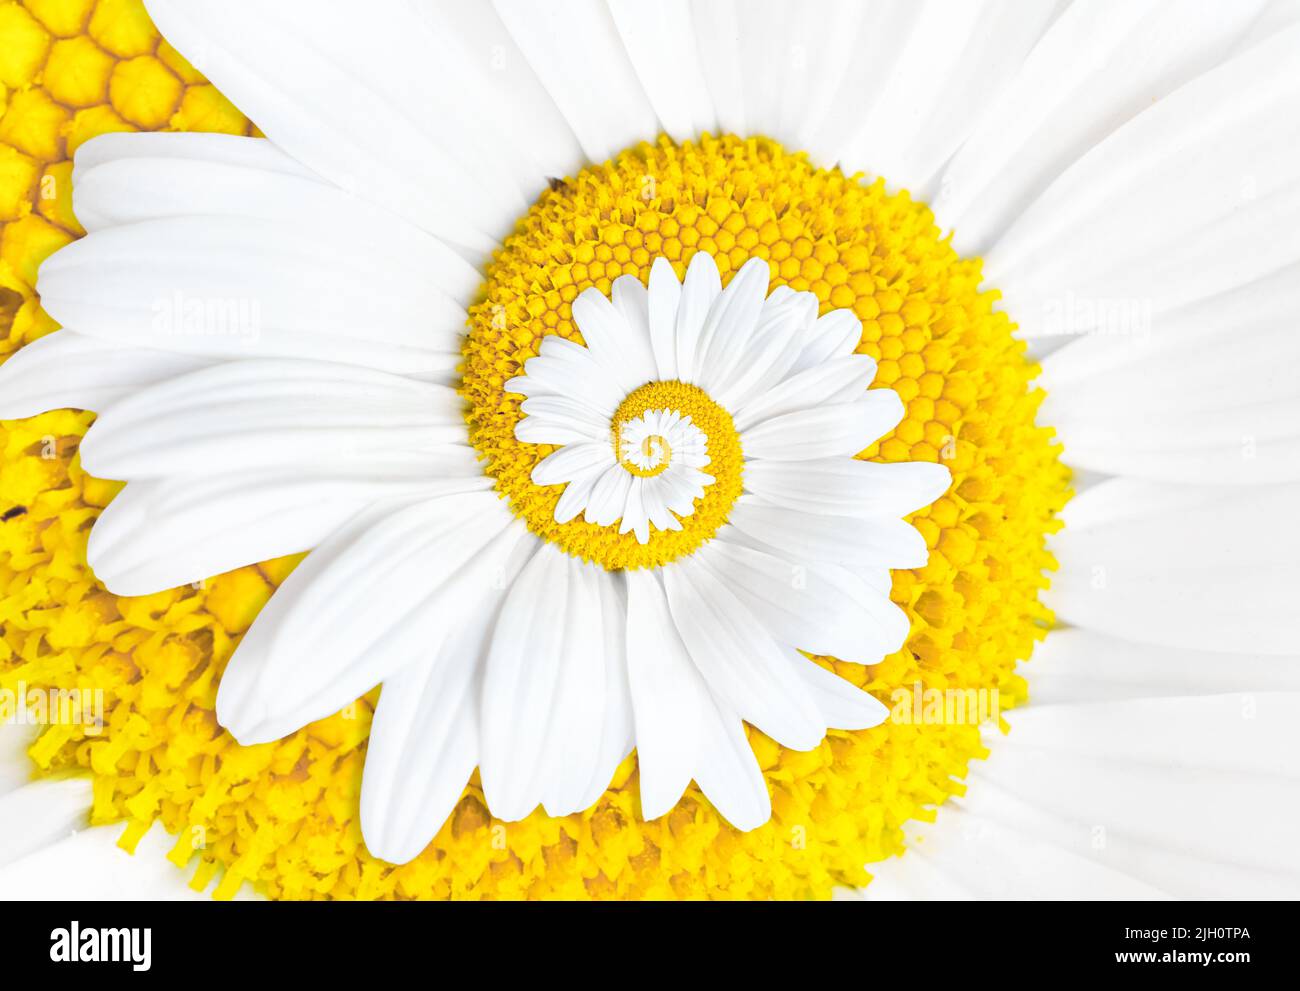 Abstract white daisy spiral background Stock Photo